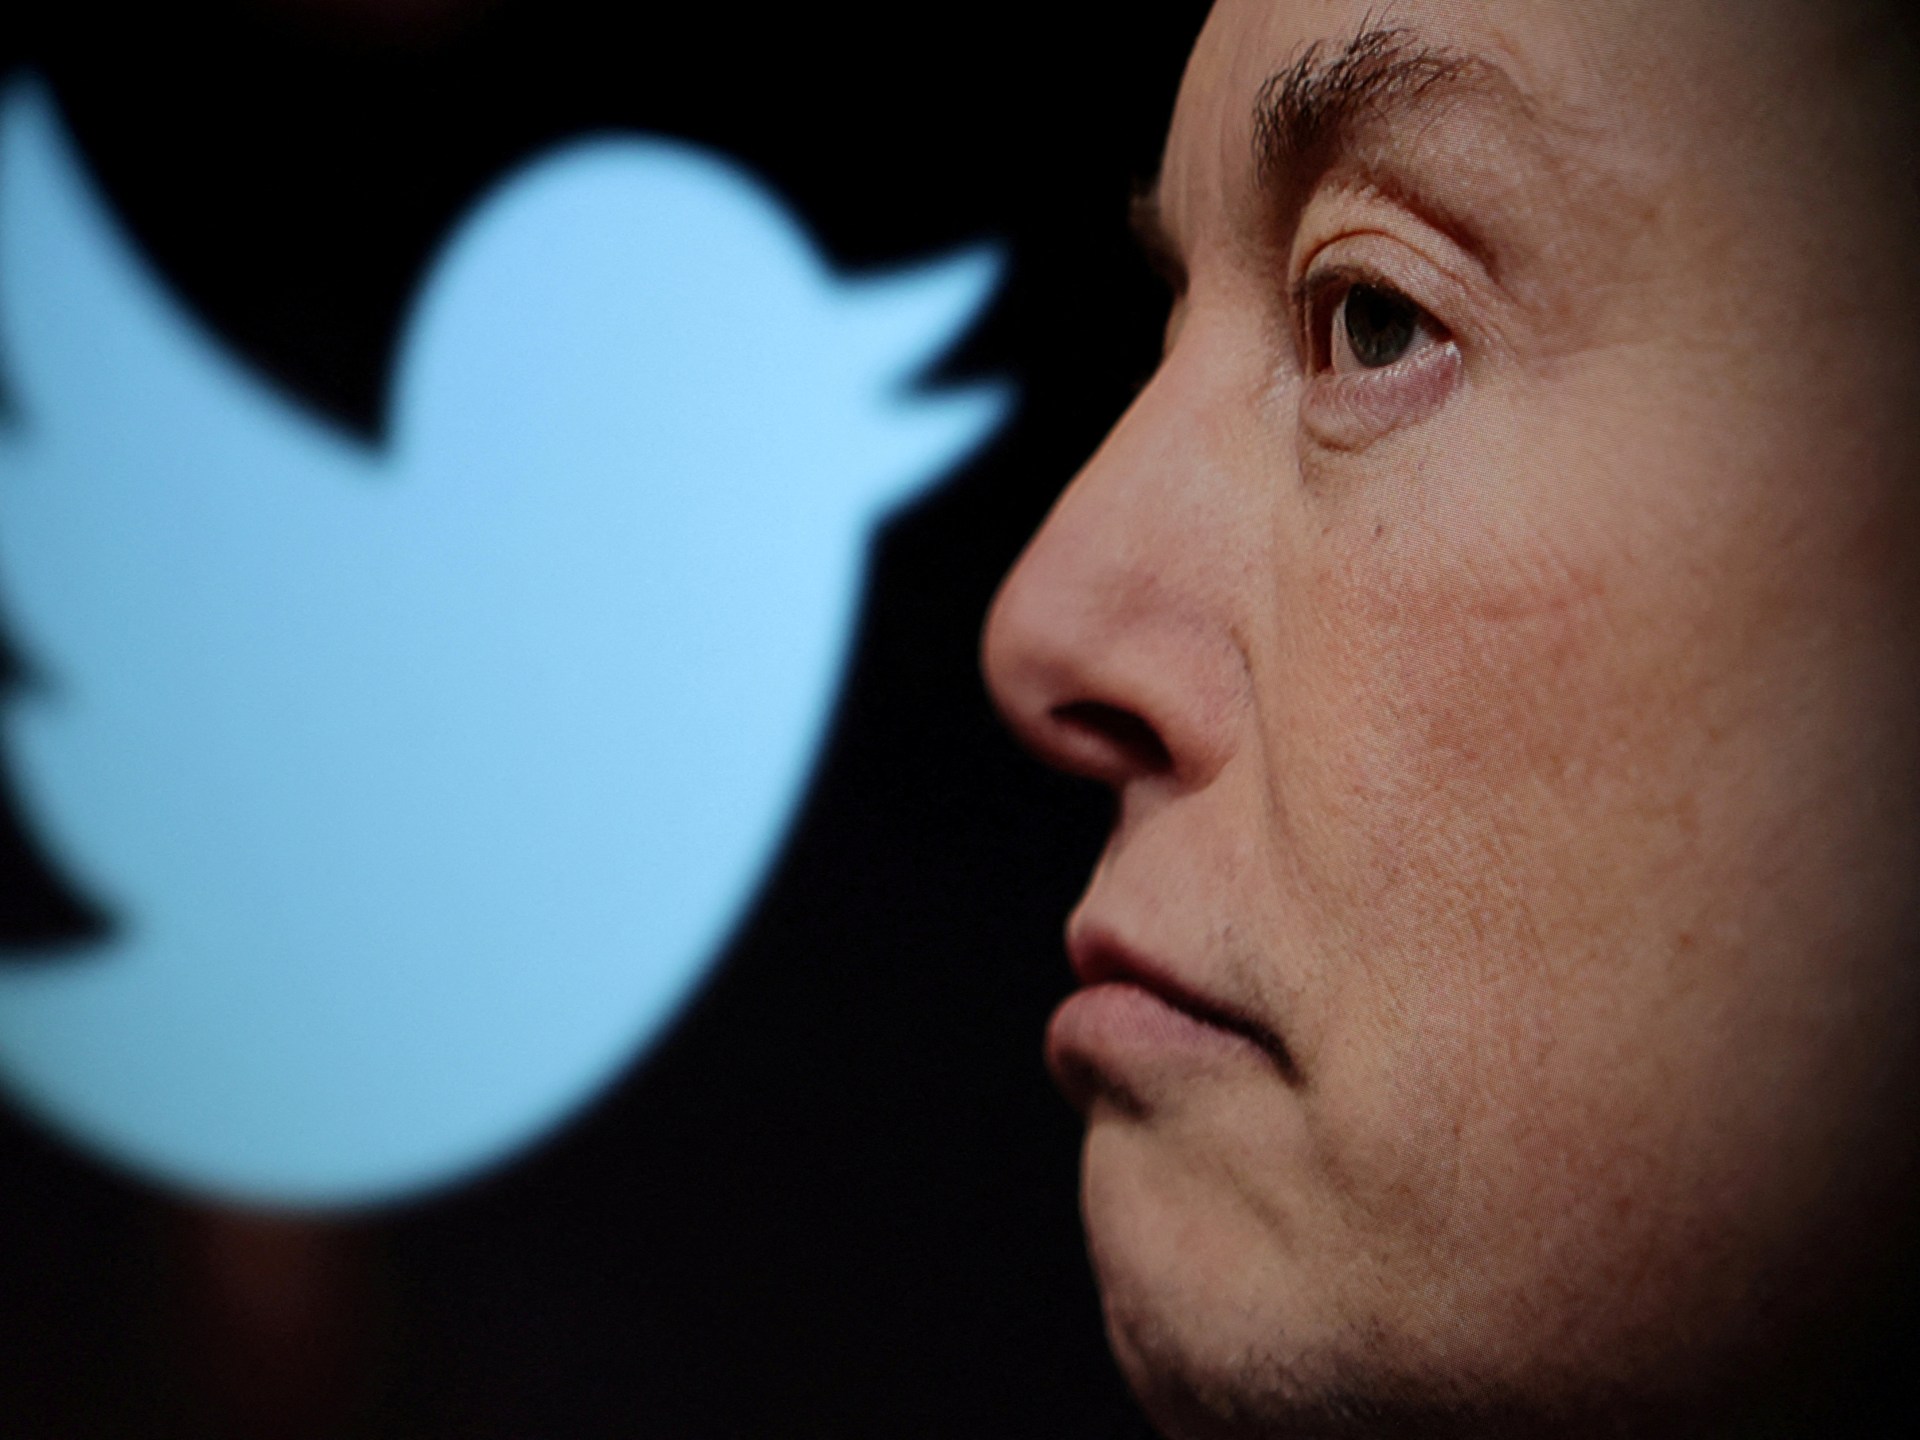 Elon Musk tells Twitter engineers to fly-in for assembly: Report